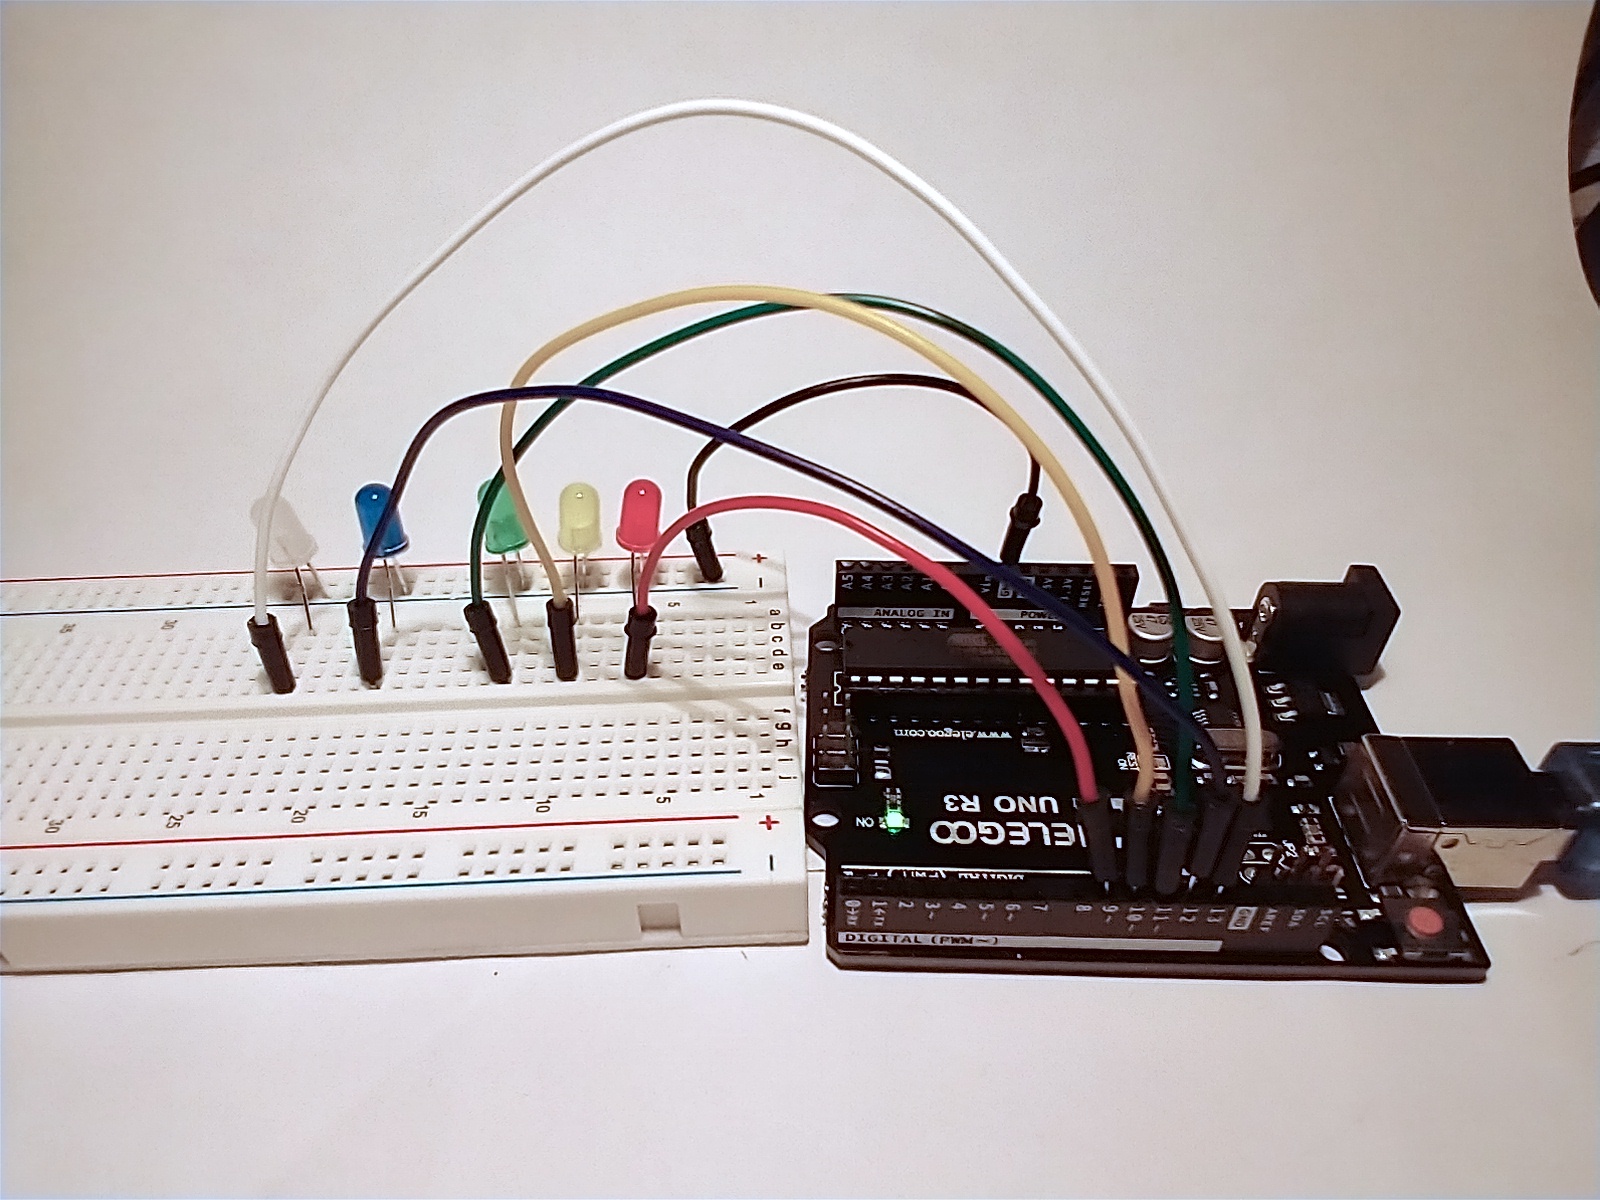 Processing to Arduino with 5 LEDs